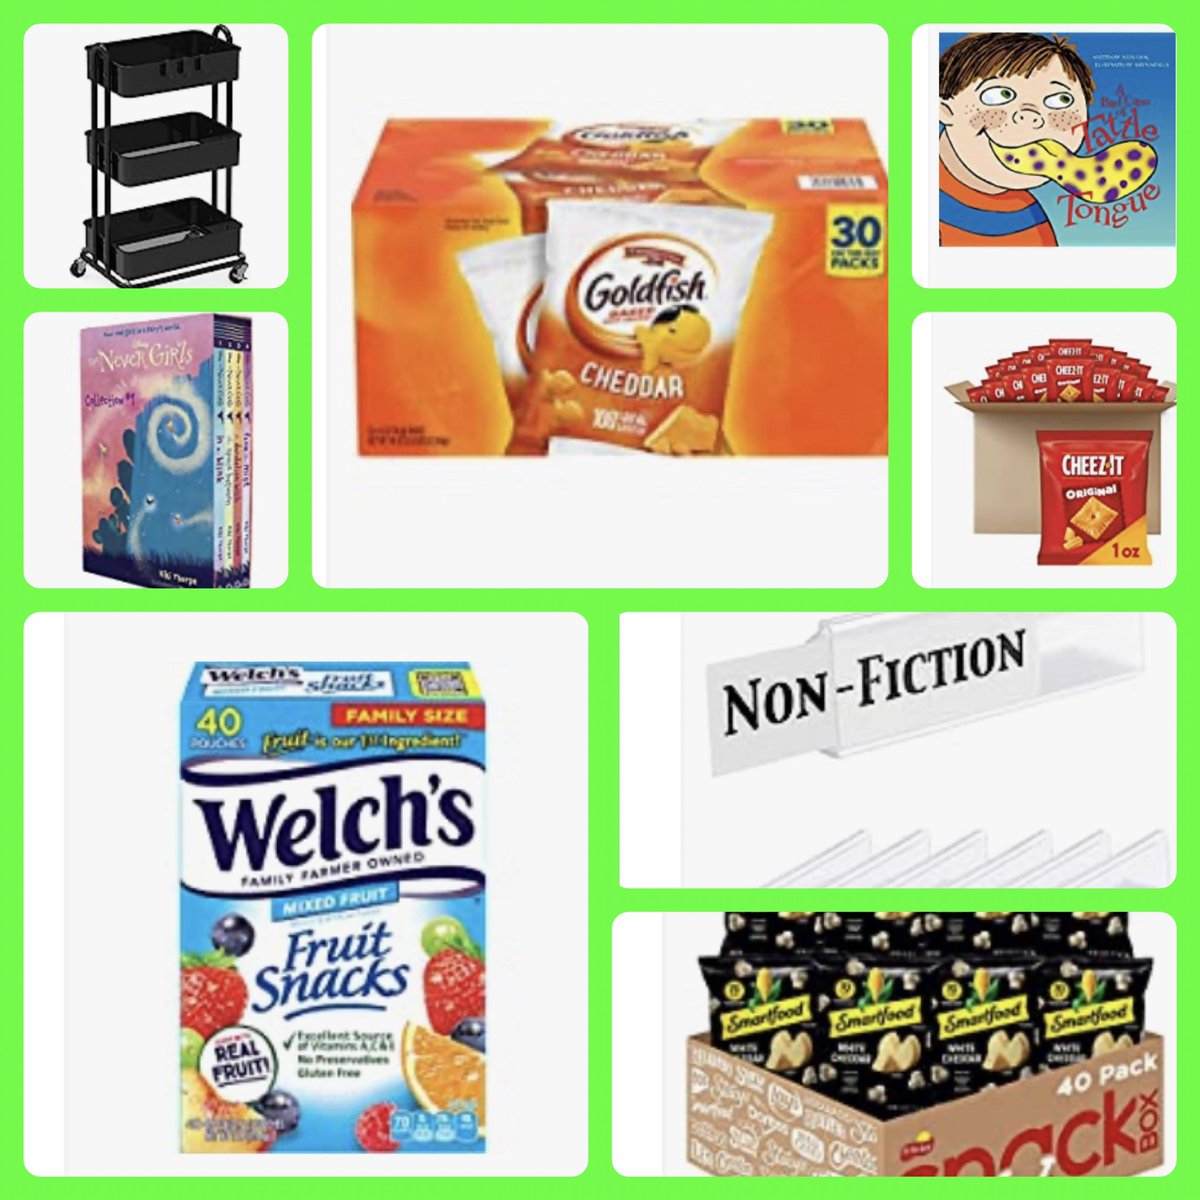 Week 5 of school. Now that we are settling in, I noticed many of my students haven’t been able to bring snacks from home. I added snacks to my list.  No child should be hungry! I teach at a Title I school in CA. TY!#clearthelist #nohungrychild 

amzn.to/3NmcbpK